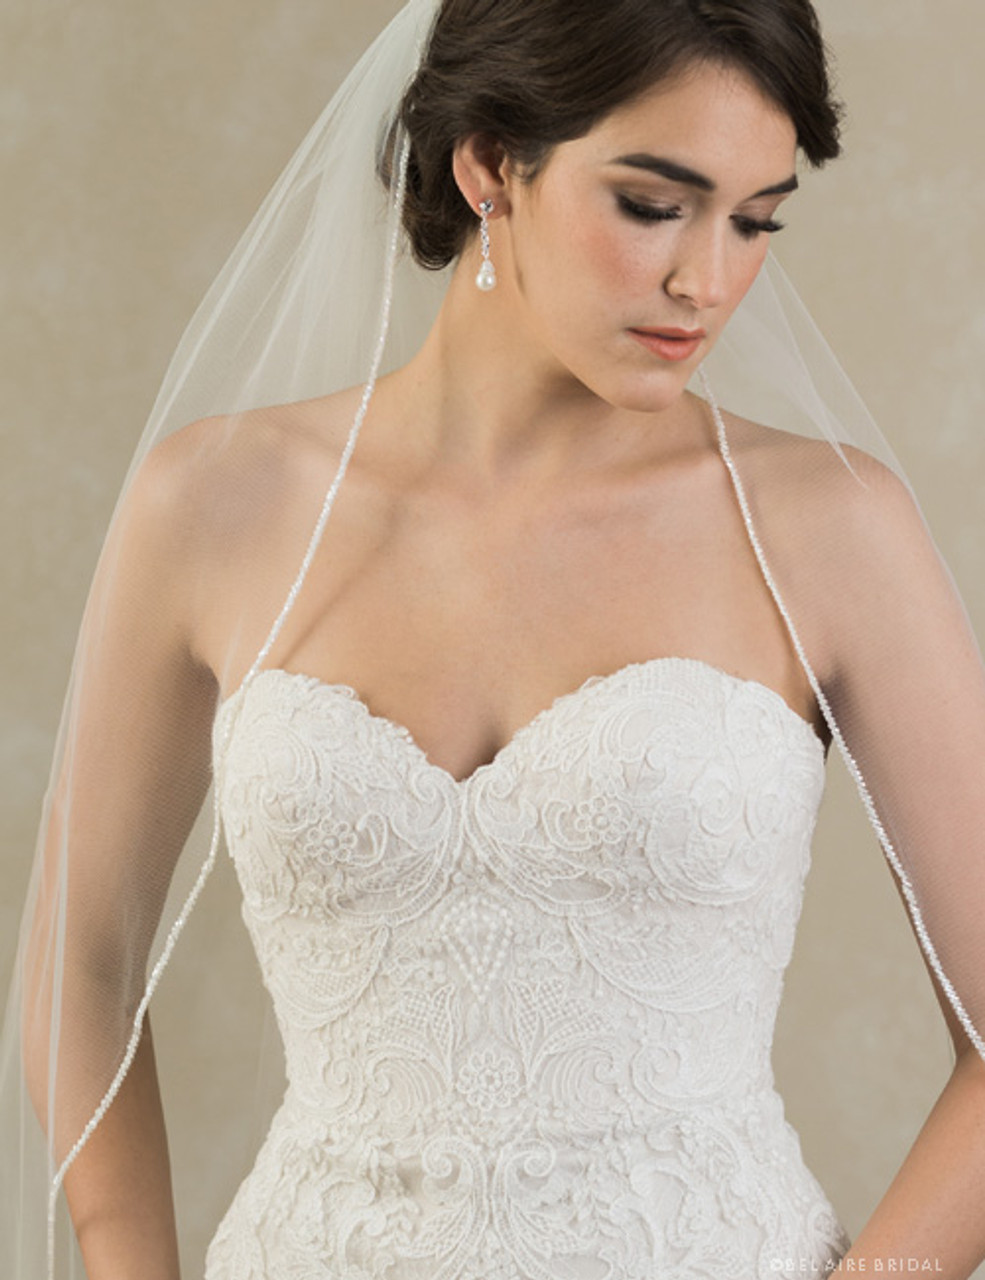 Bel Aire Bridal Veils V7383 -  1-tier fingertip veil with frosted bead edge